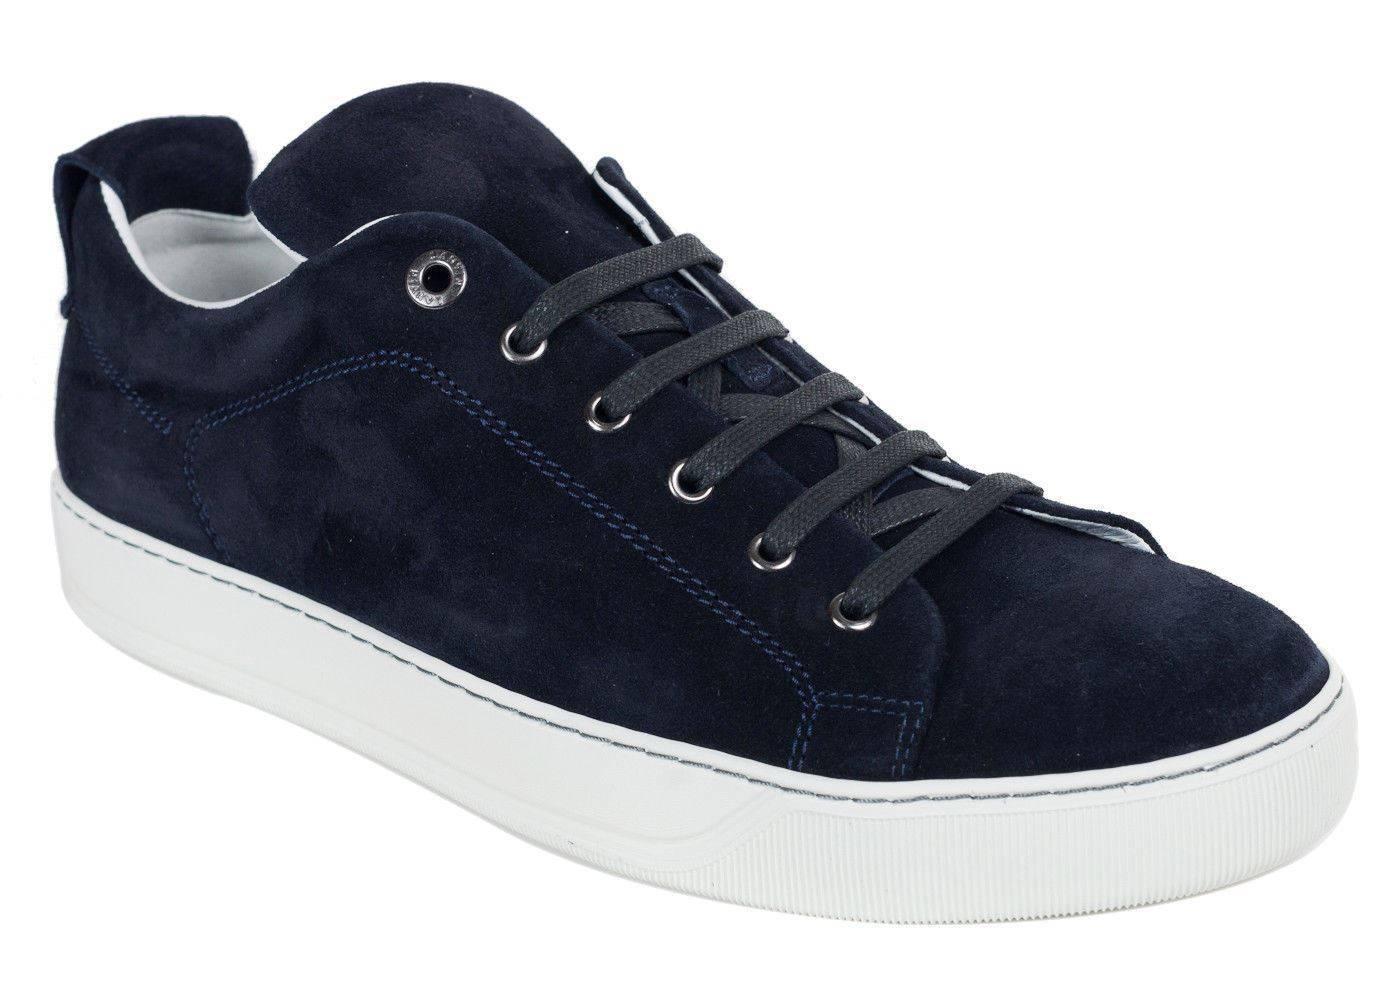 Mens Lanvin Navy Suede Nubuck Calfskin Lace Up Low Top Sneakers In New Condition For Sale In Brooklyn, NY